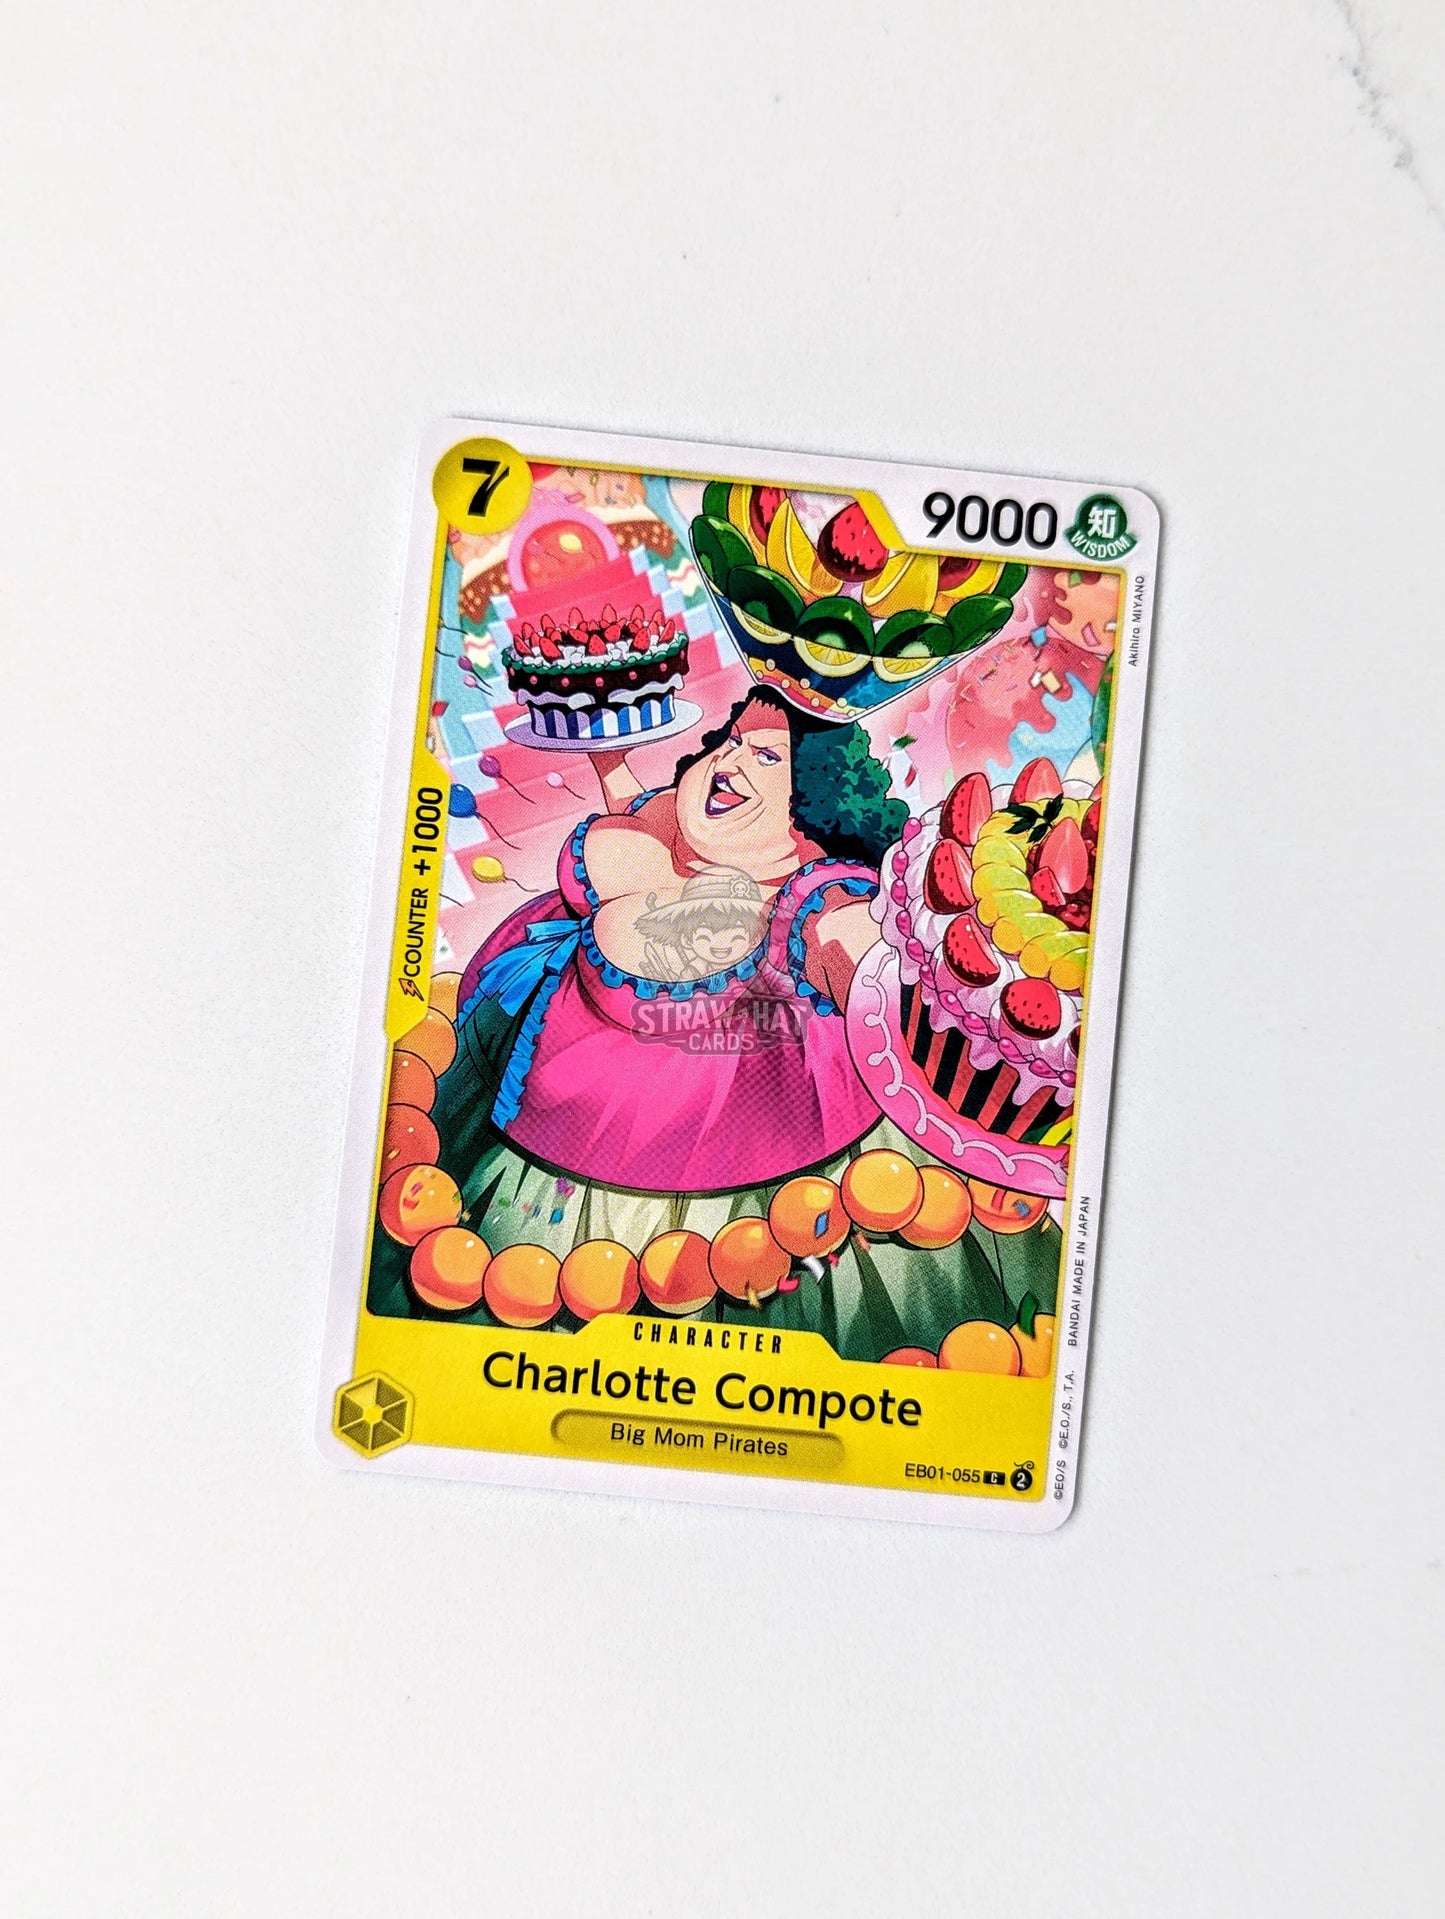 One Piece Eb01 Memorial Collection Charlotte Compote Eb01-055 C Card [Eng 🏴󠁧󠁢󠁥󠁮󠁧󠁿] Trading Card